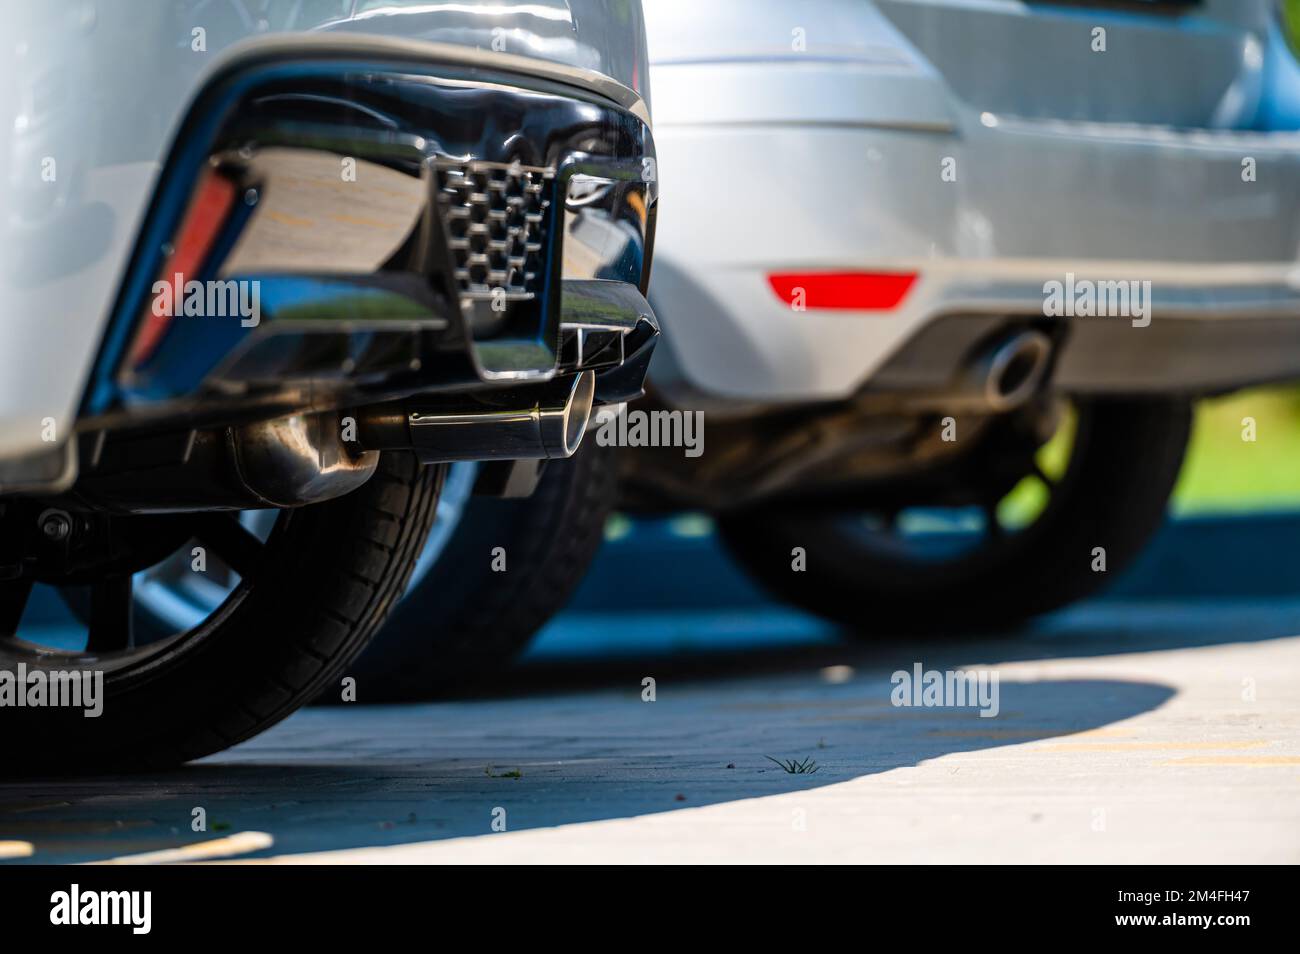 close-up of the wheels and bumpers of a car parked in the yard of a residential house, lower section Stock Photo